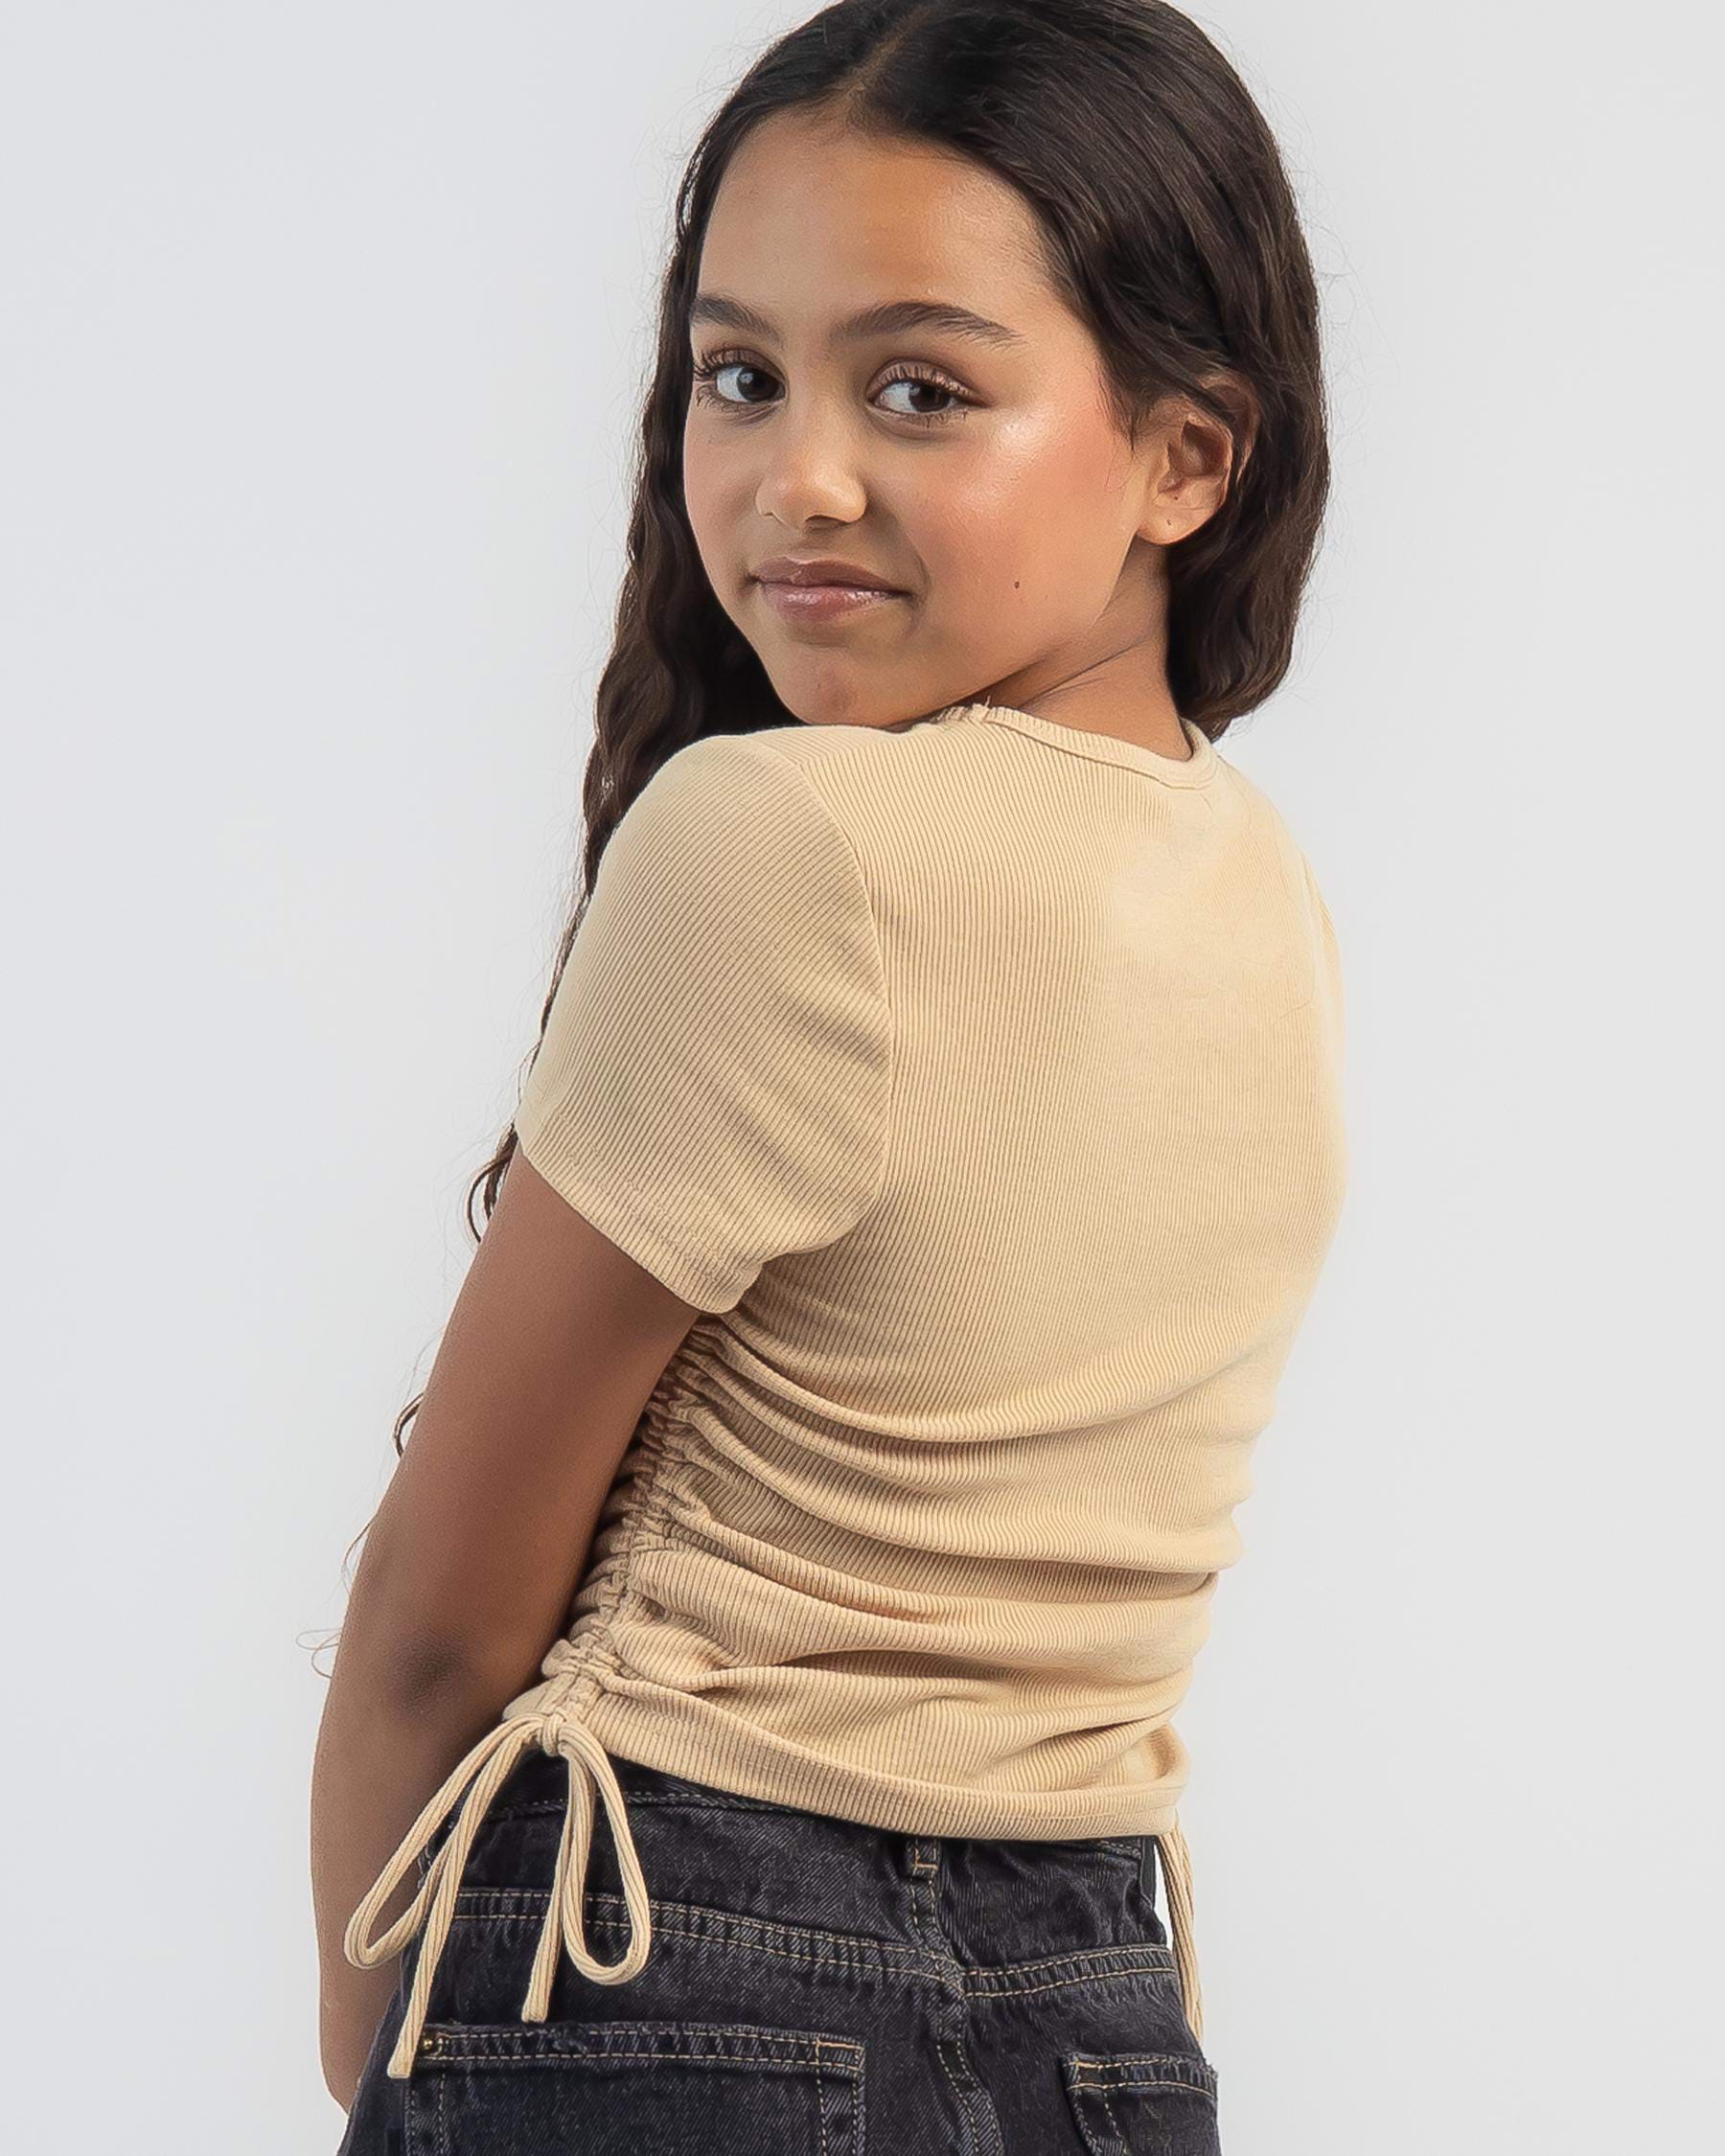 Ava And Ever Girls' Kenny Top In Beige - Fast Shipping & Easy Returns ...